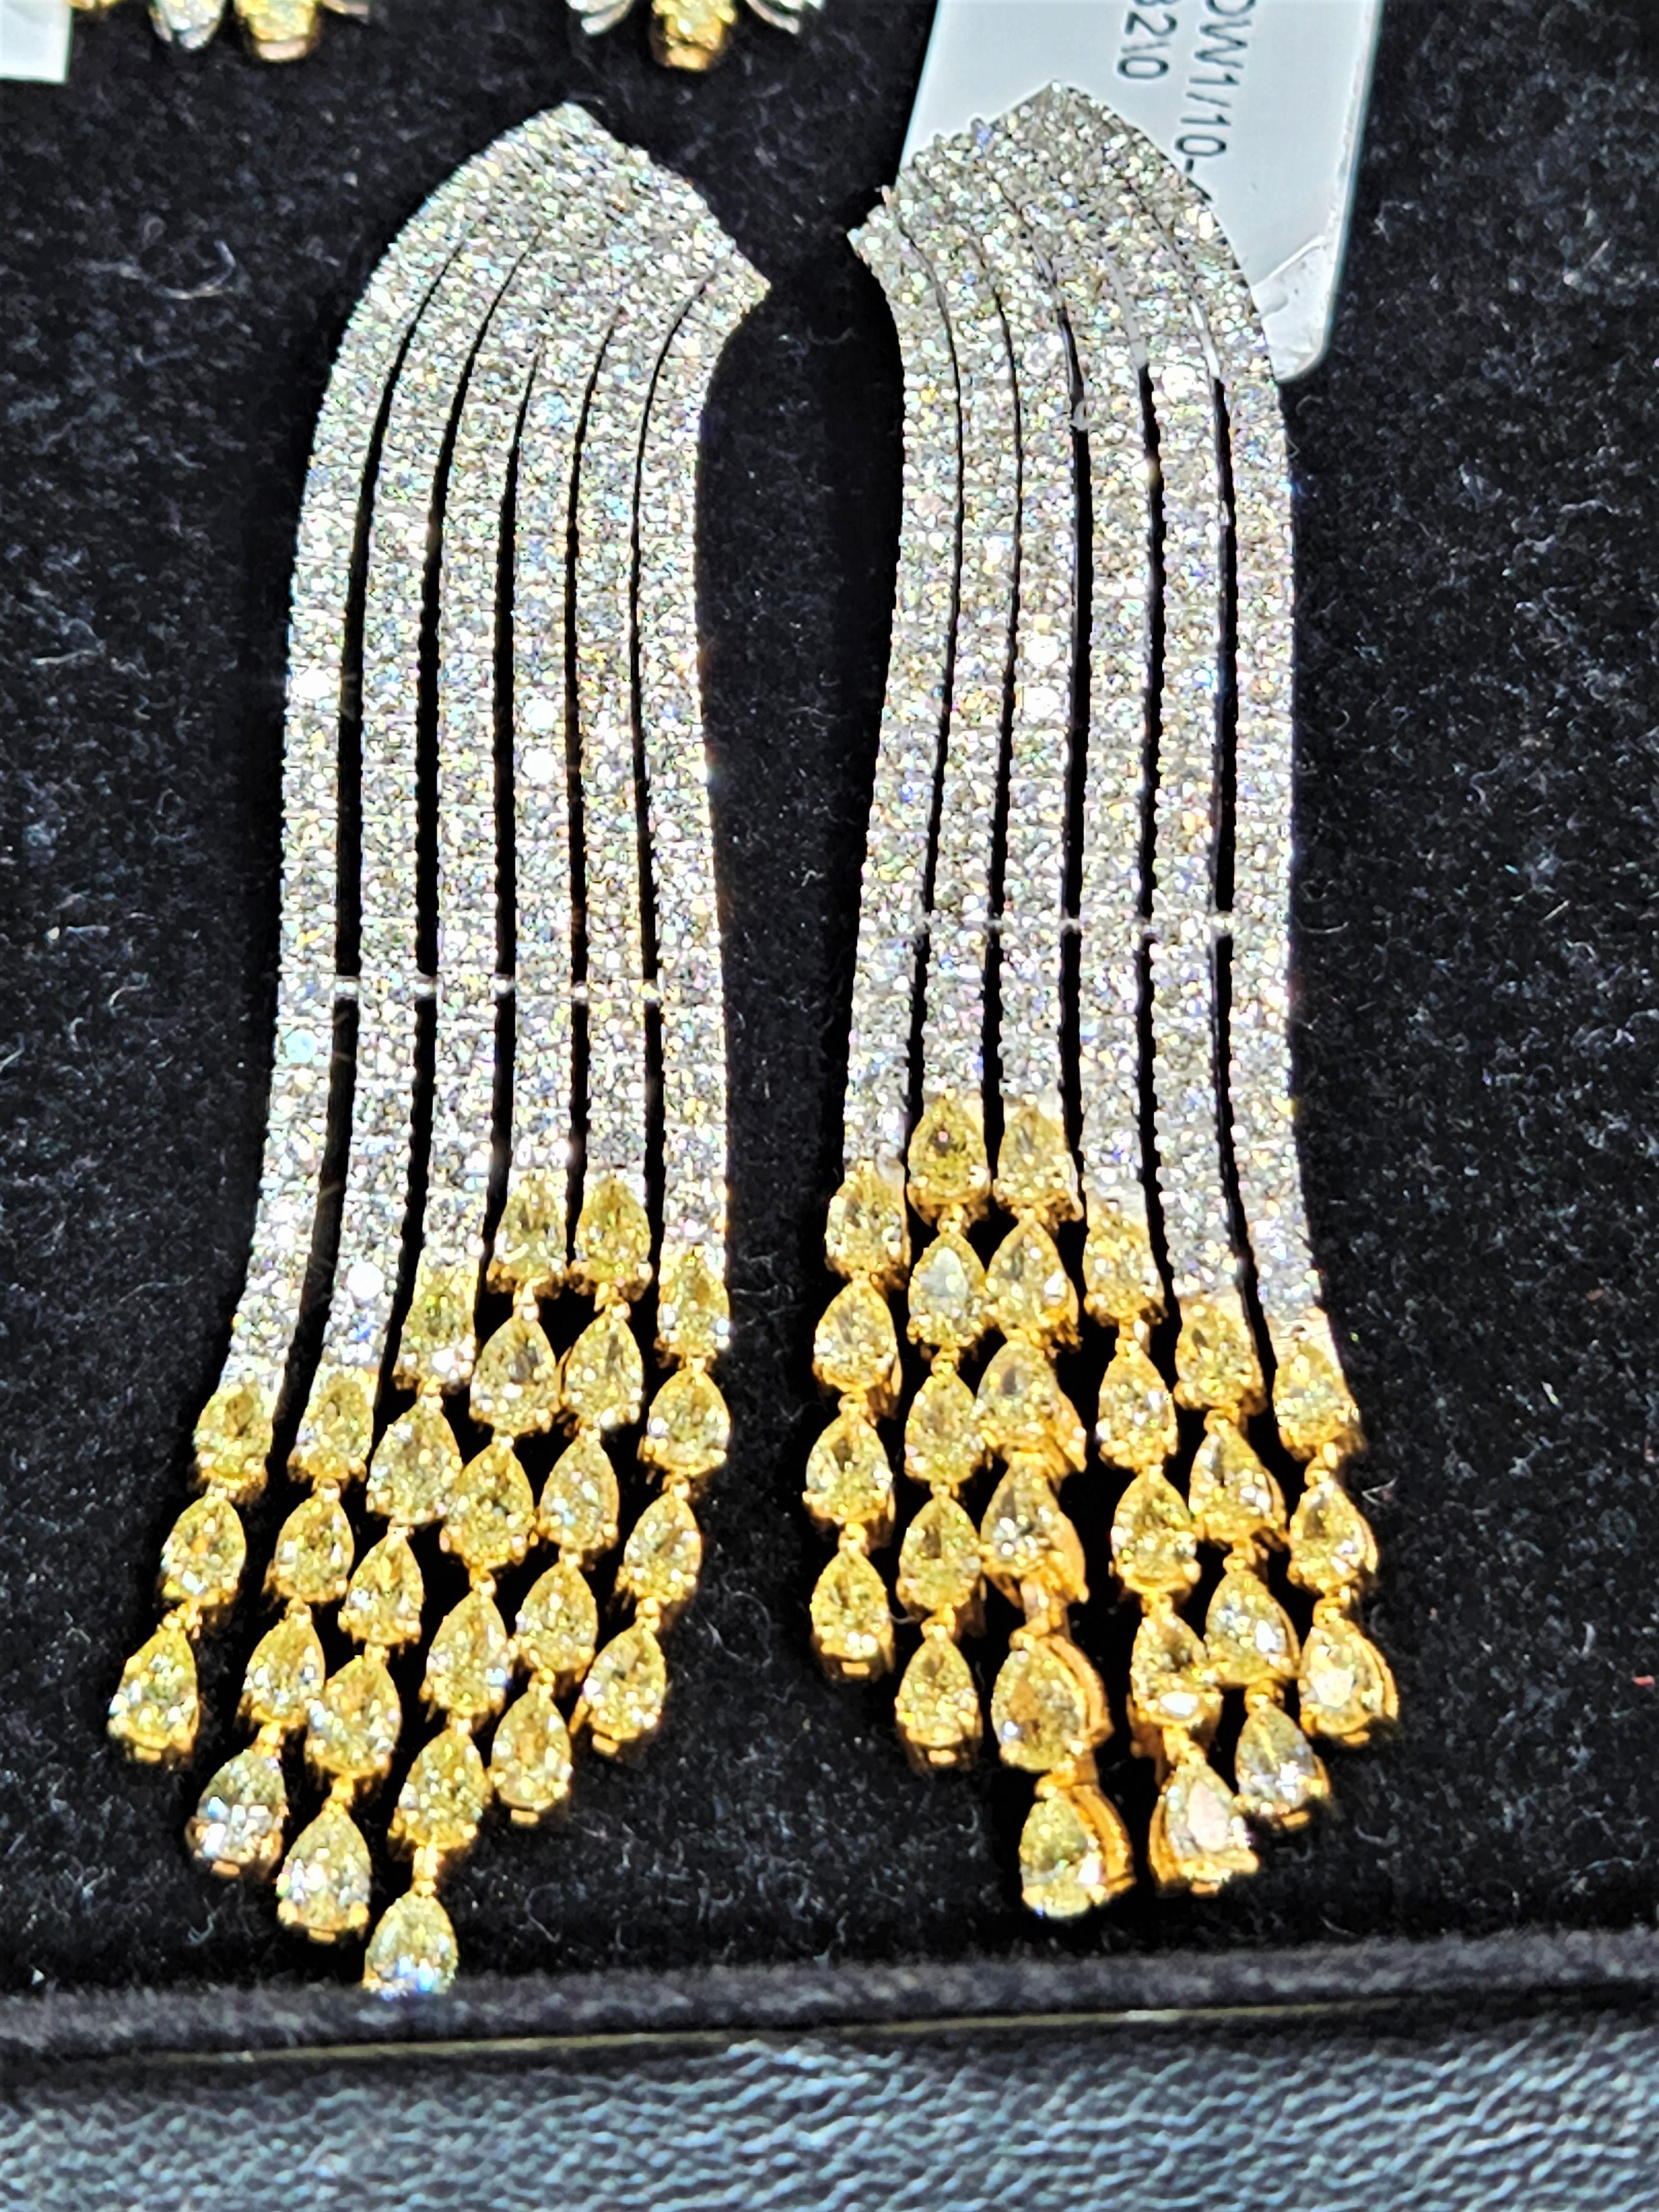 The Following Item we are offering are these Extremely Rare Beautiful 14KT Gold Fine Large Fancy Yellow and White Diamond Dangle Earrings. Each Earring features Rare Gorgeous Glittering Fancy Yellow Diamonds Draped around Sparkling White Diamonds